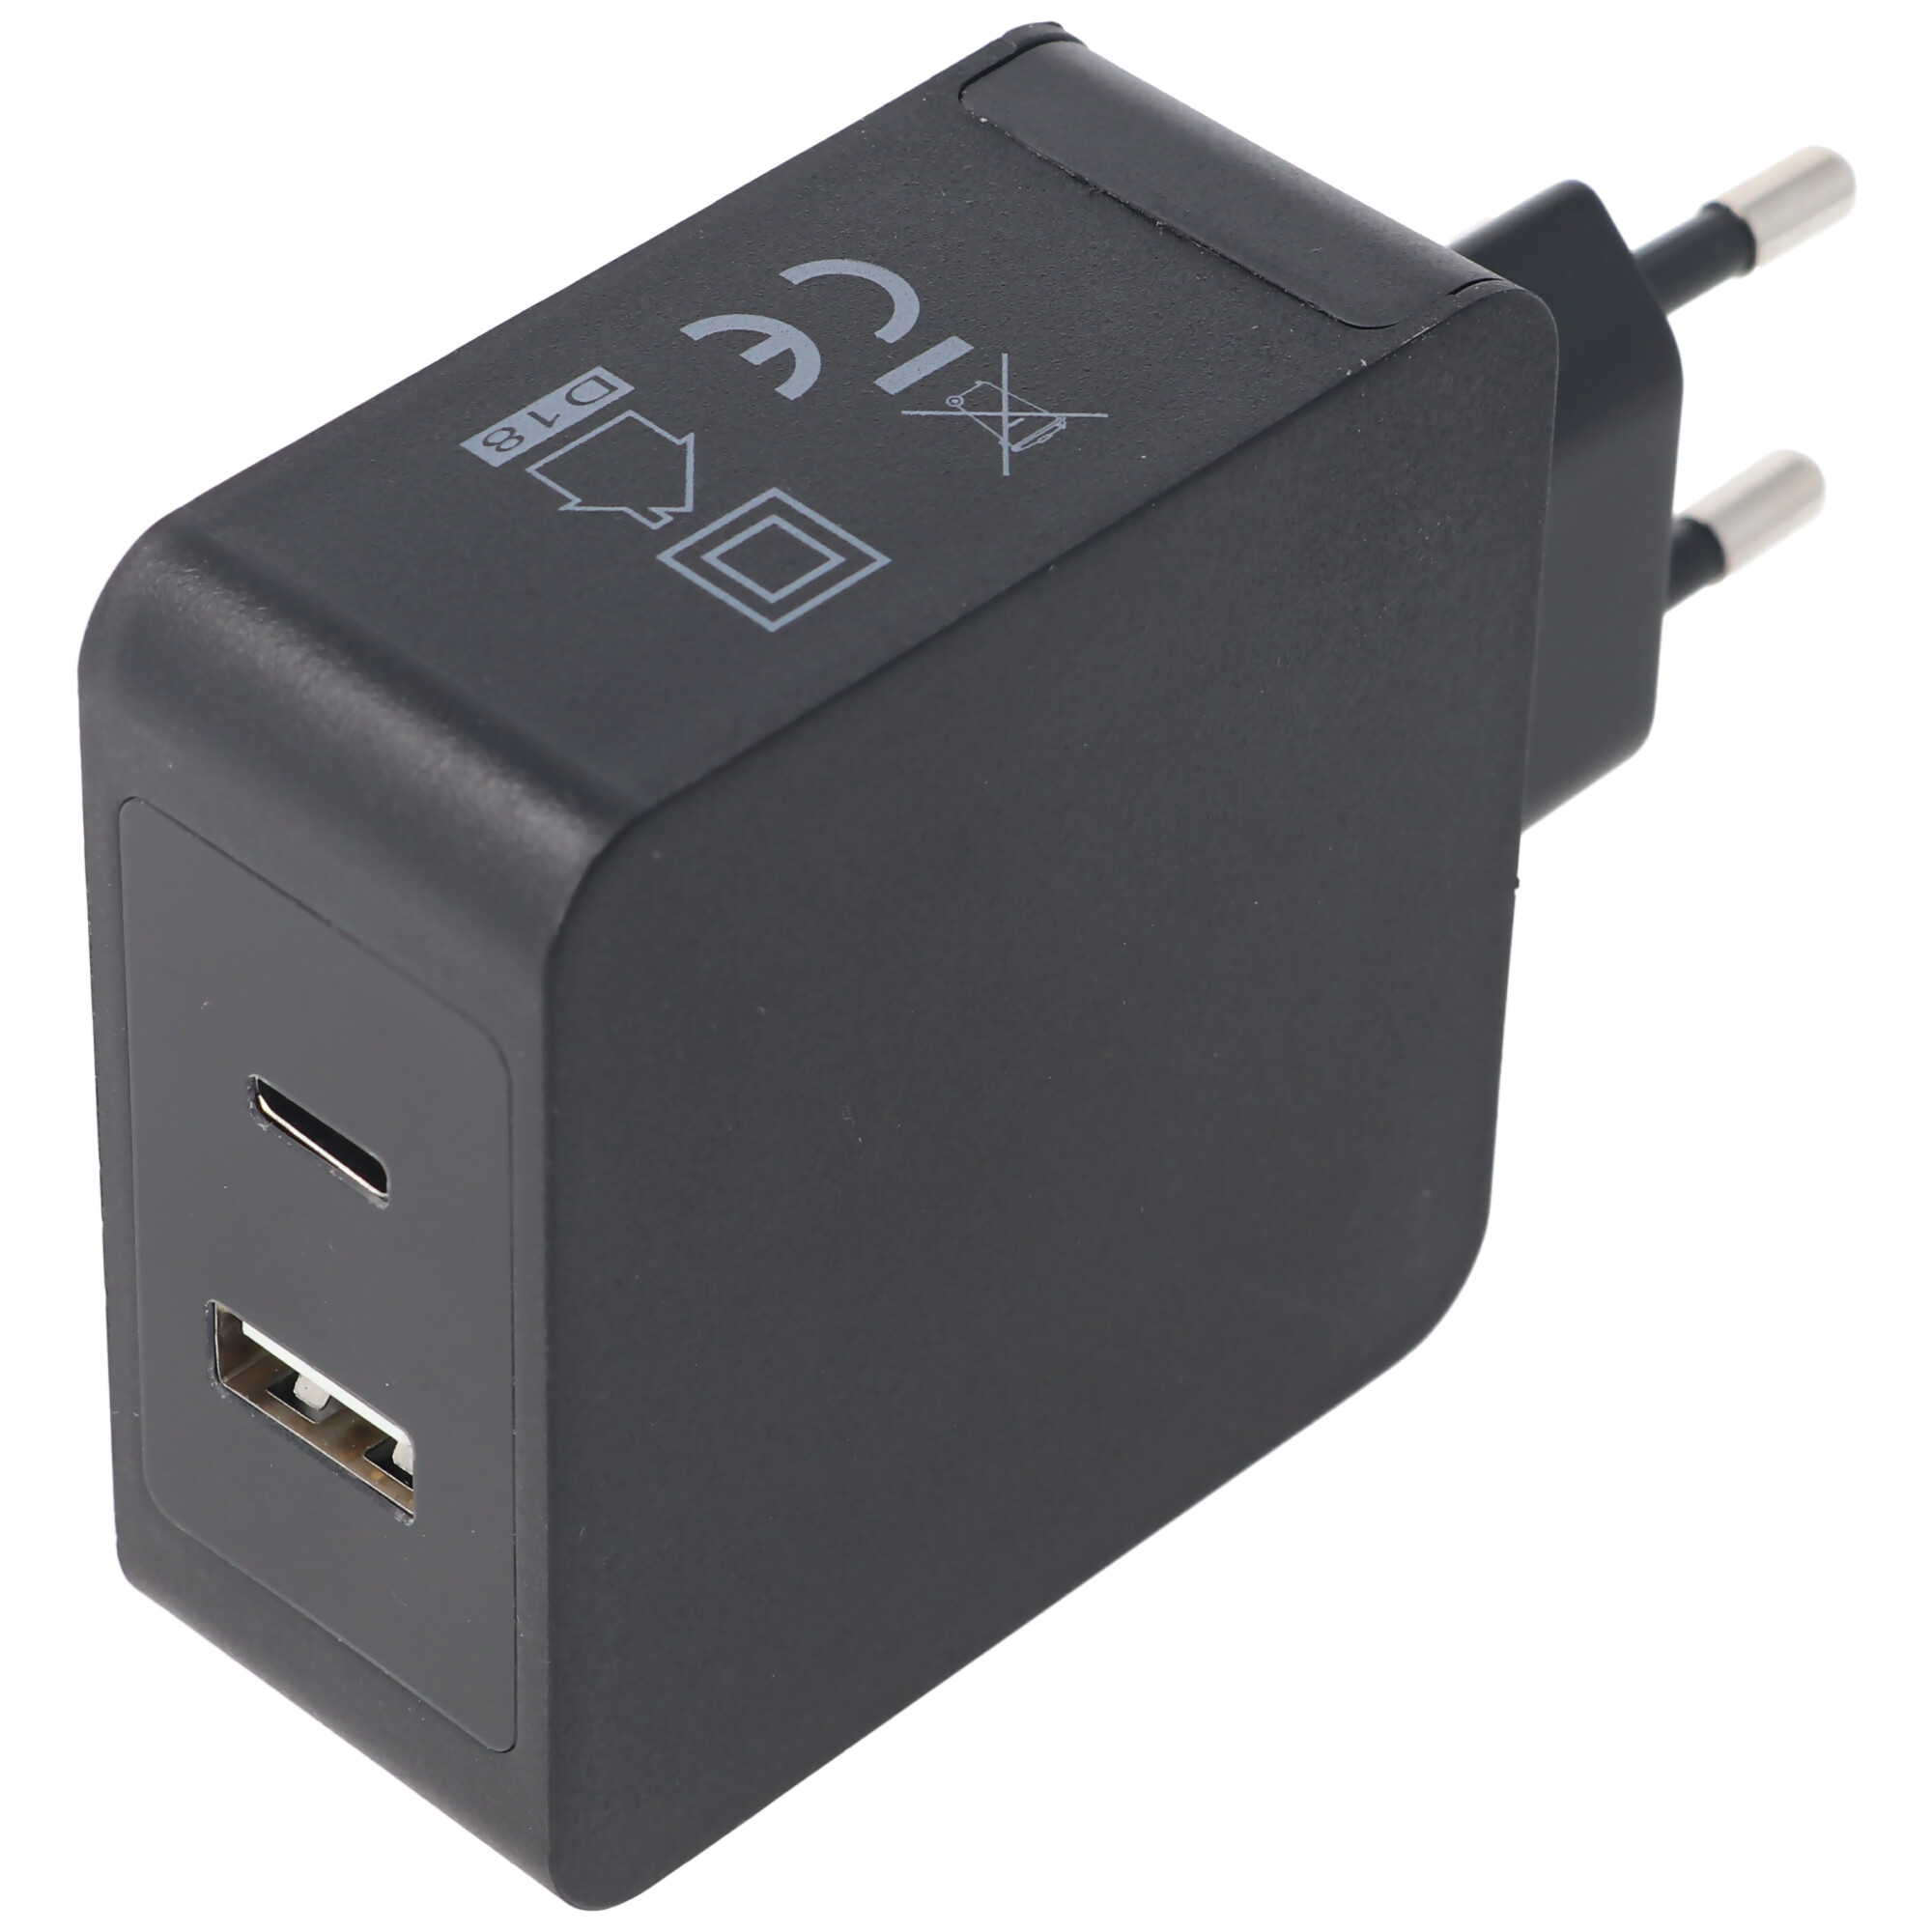 Ultra schnelles laden, USB-Netzteil QC 3.0 5V 3,1A Quick Charge max. 18W